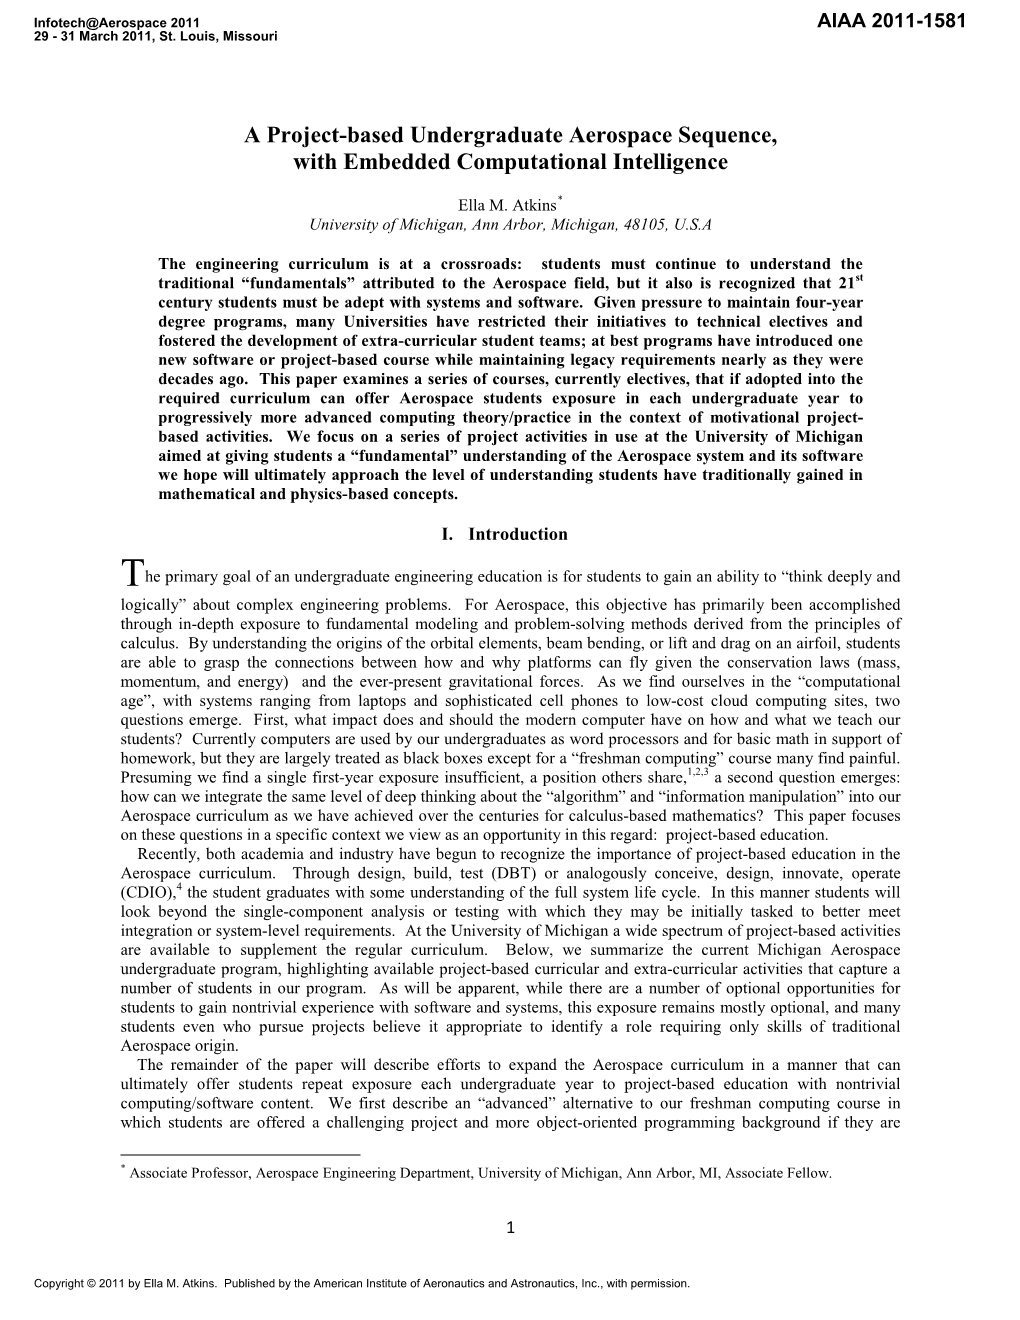 A Project-Based Undergraduate Aerospace Sequence, with Embedded Computational Intelligence